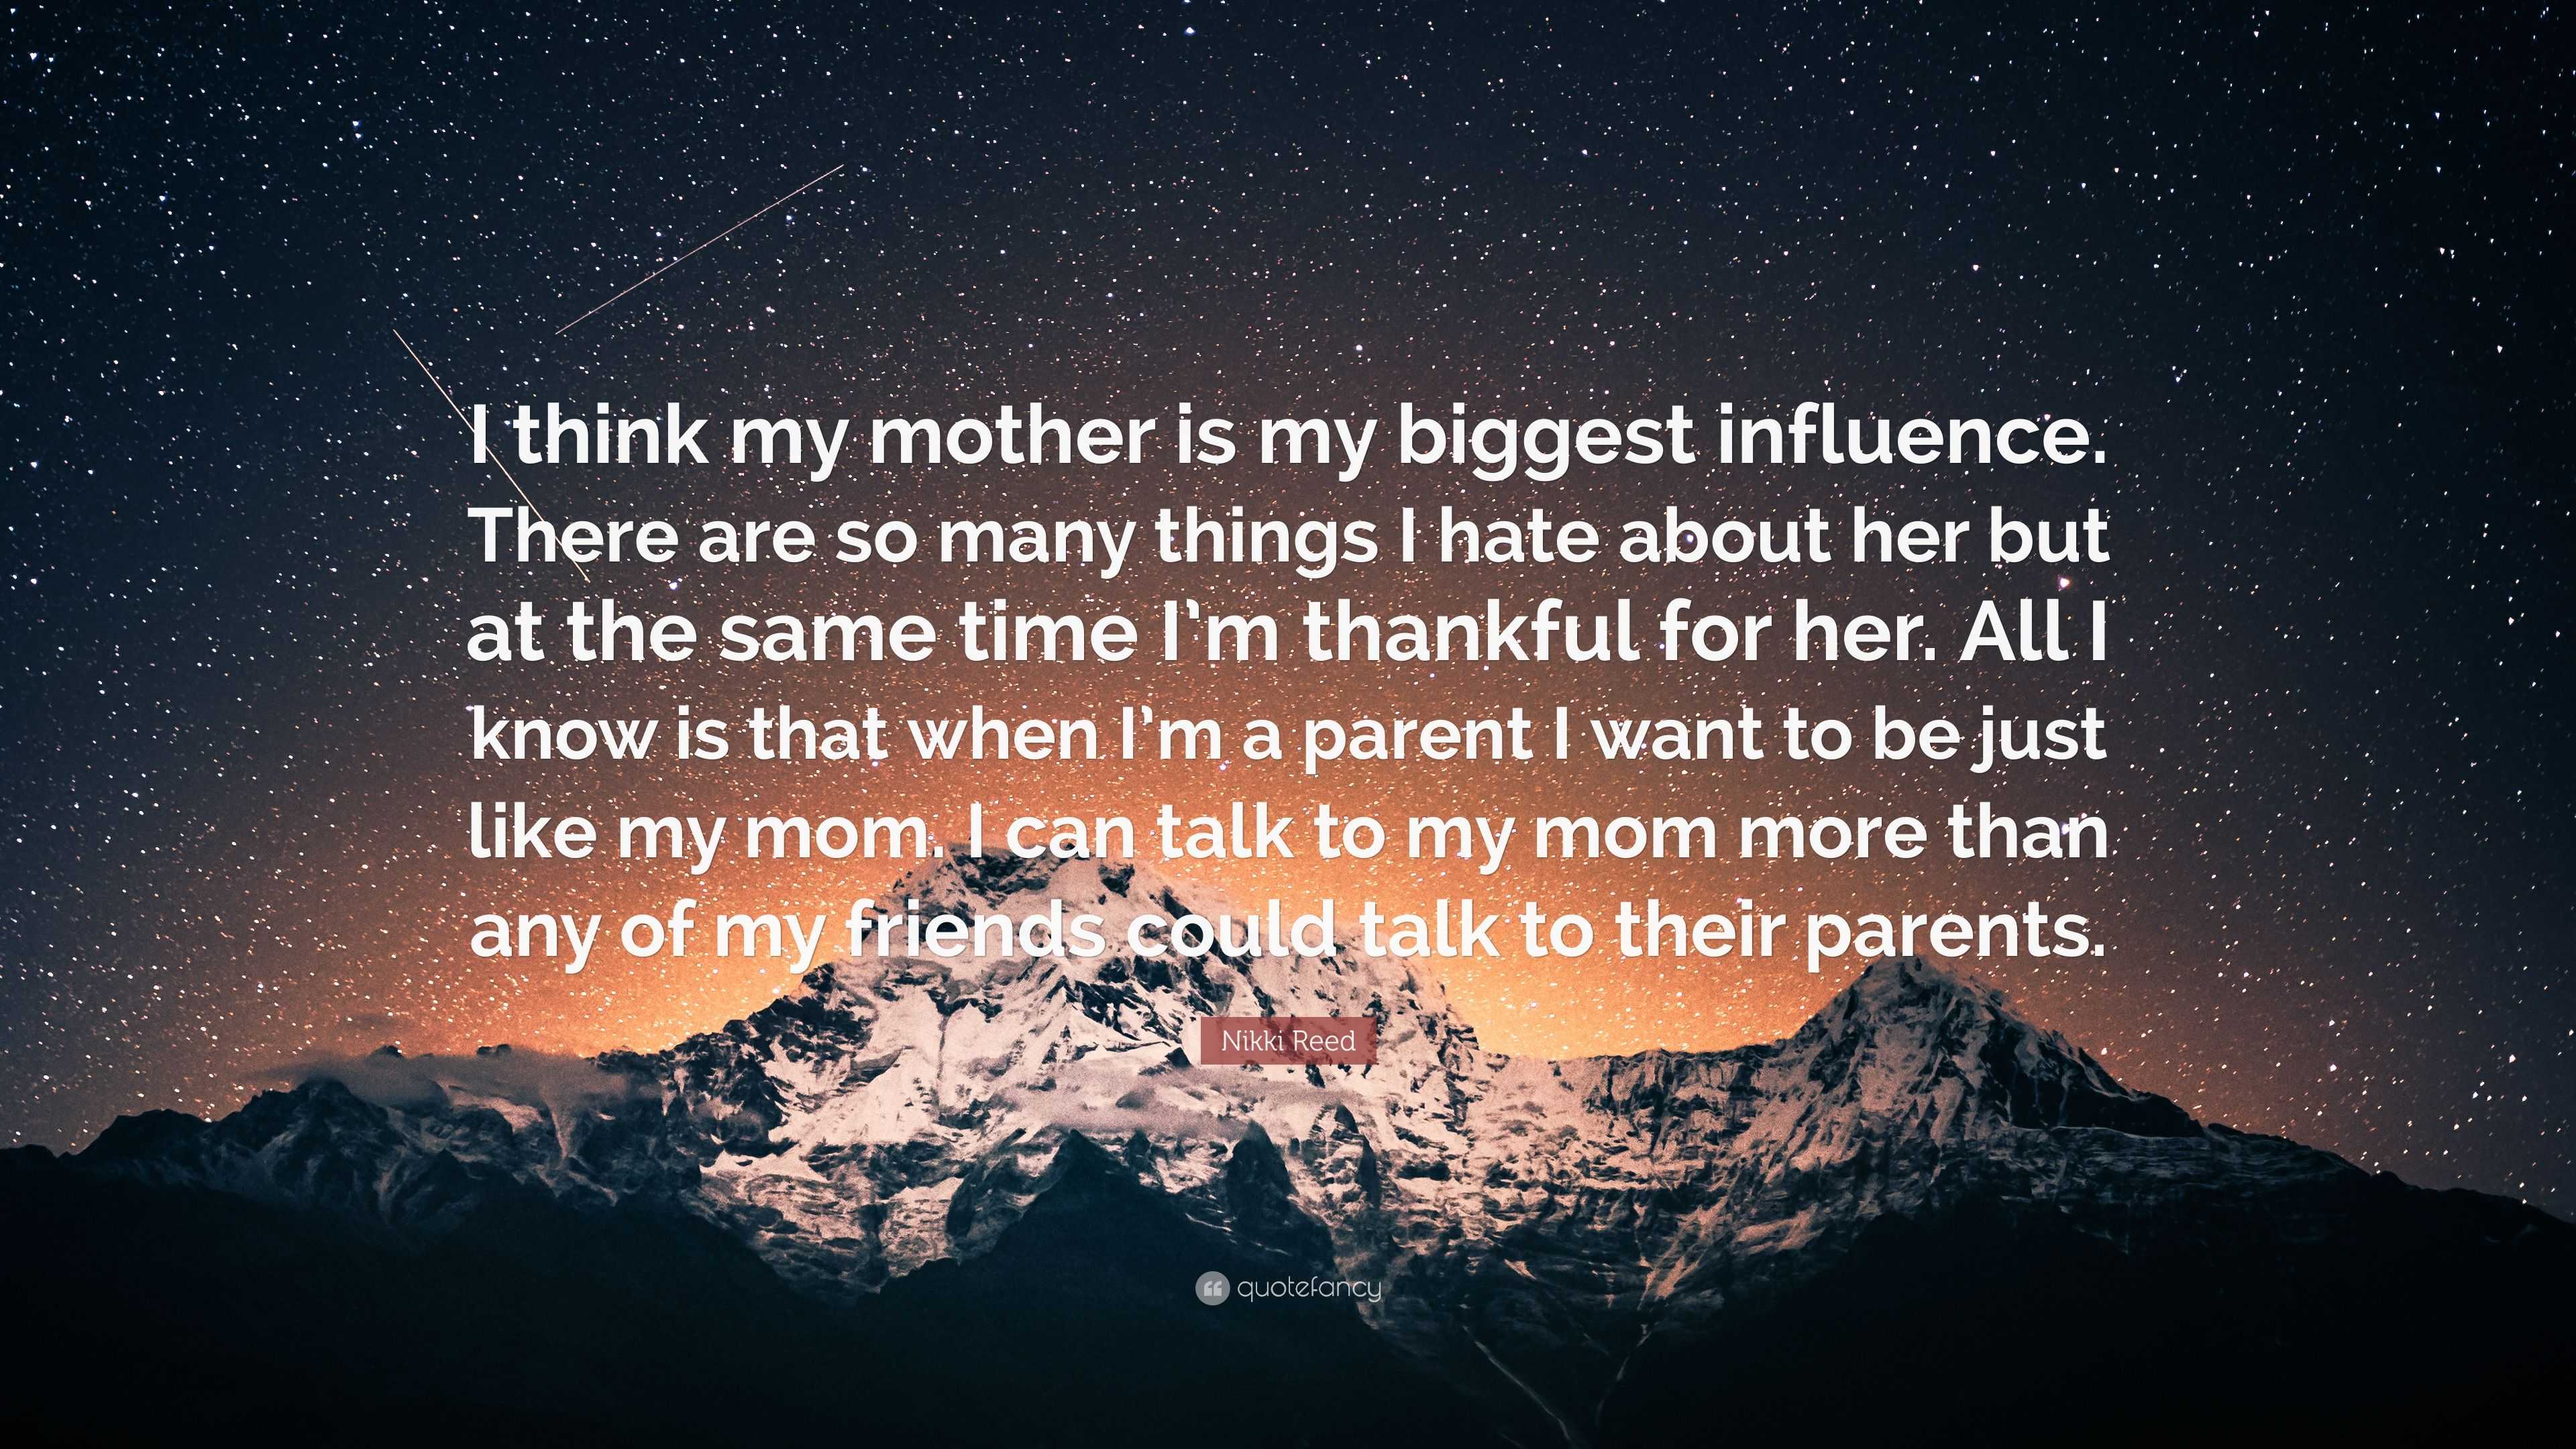 Nikki Reed Quote: “I think my mother is my biggest influence. There are so  many things I hate about her but at the same time I'm thankful f...”